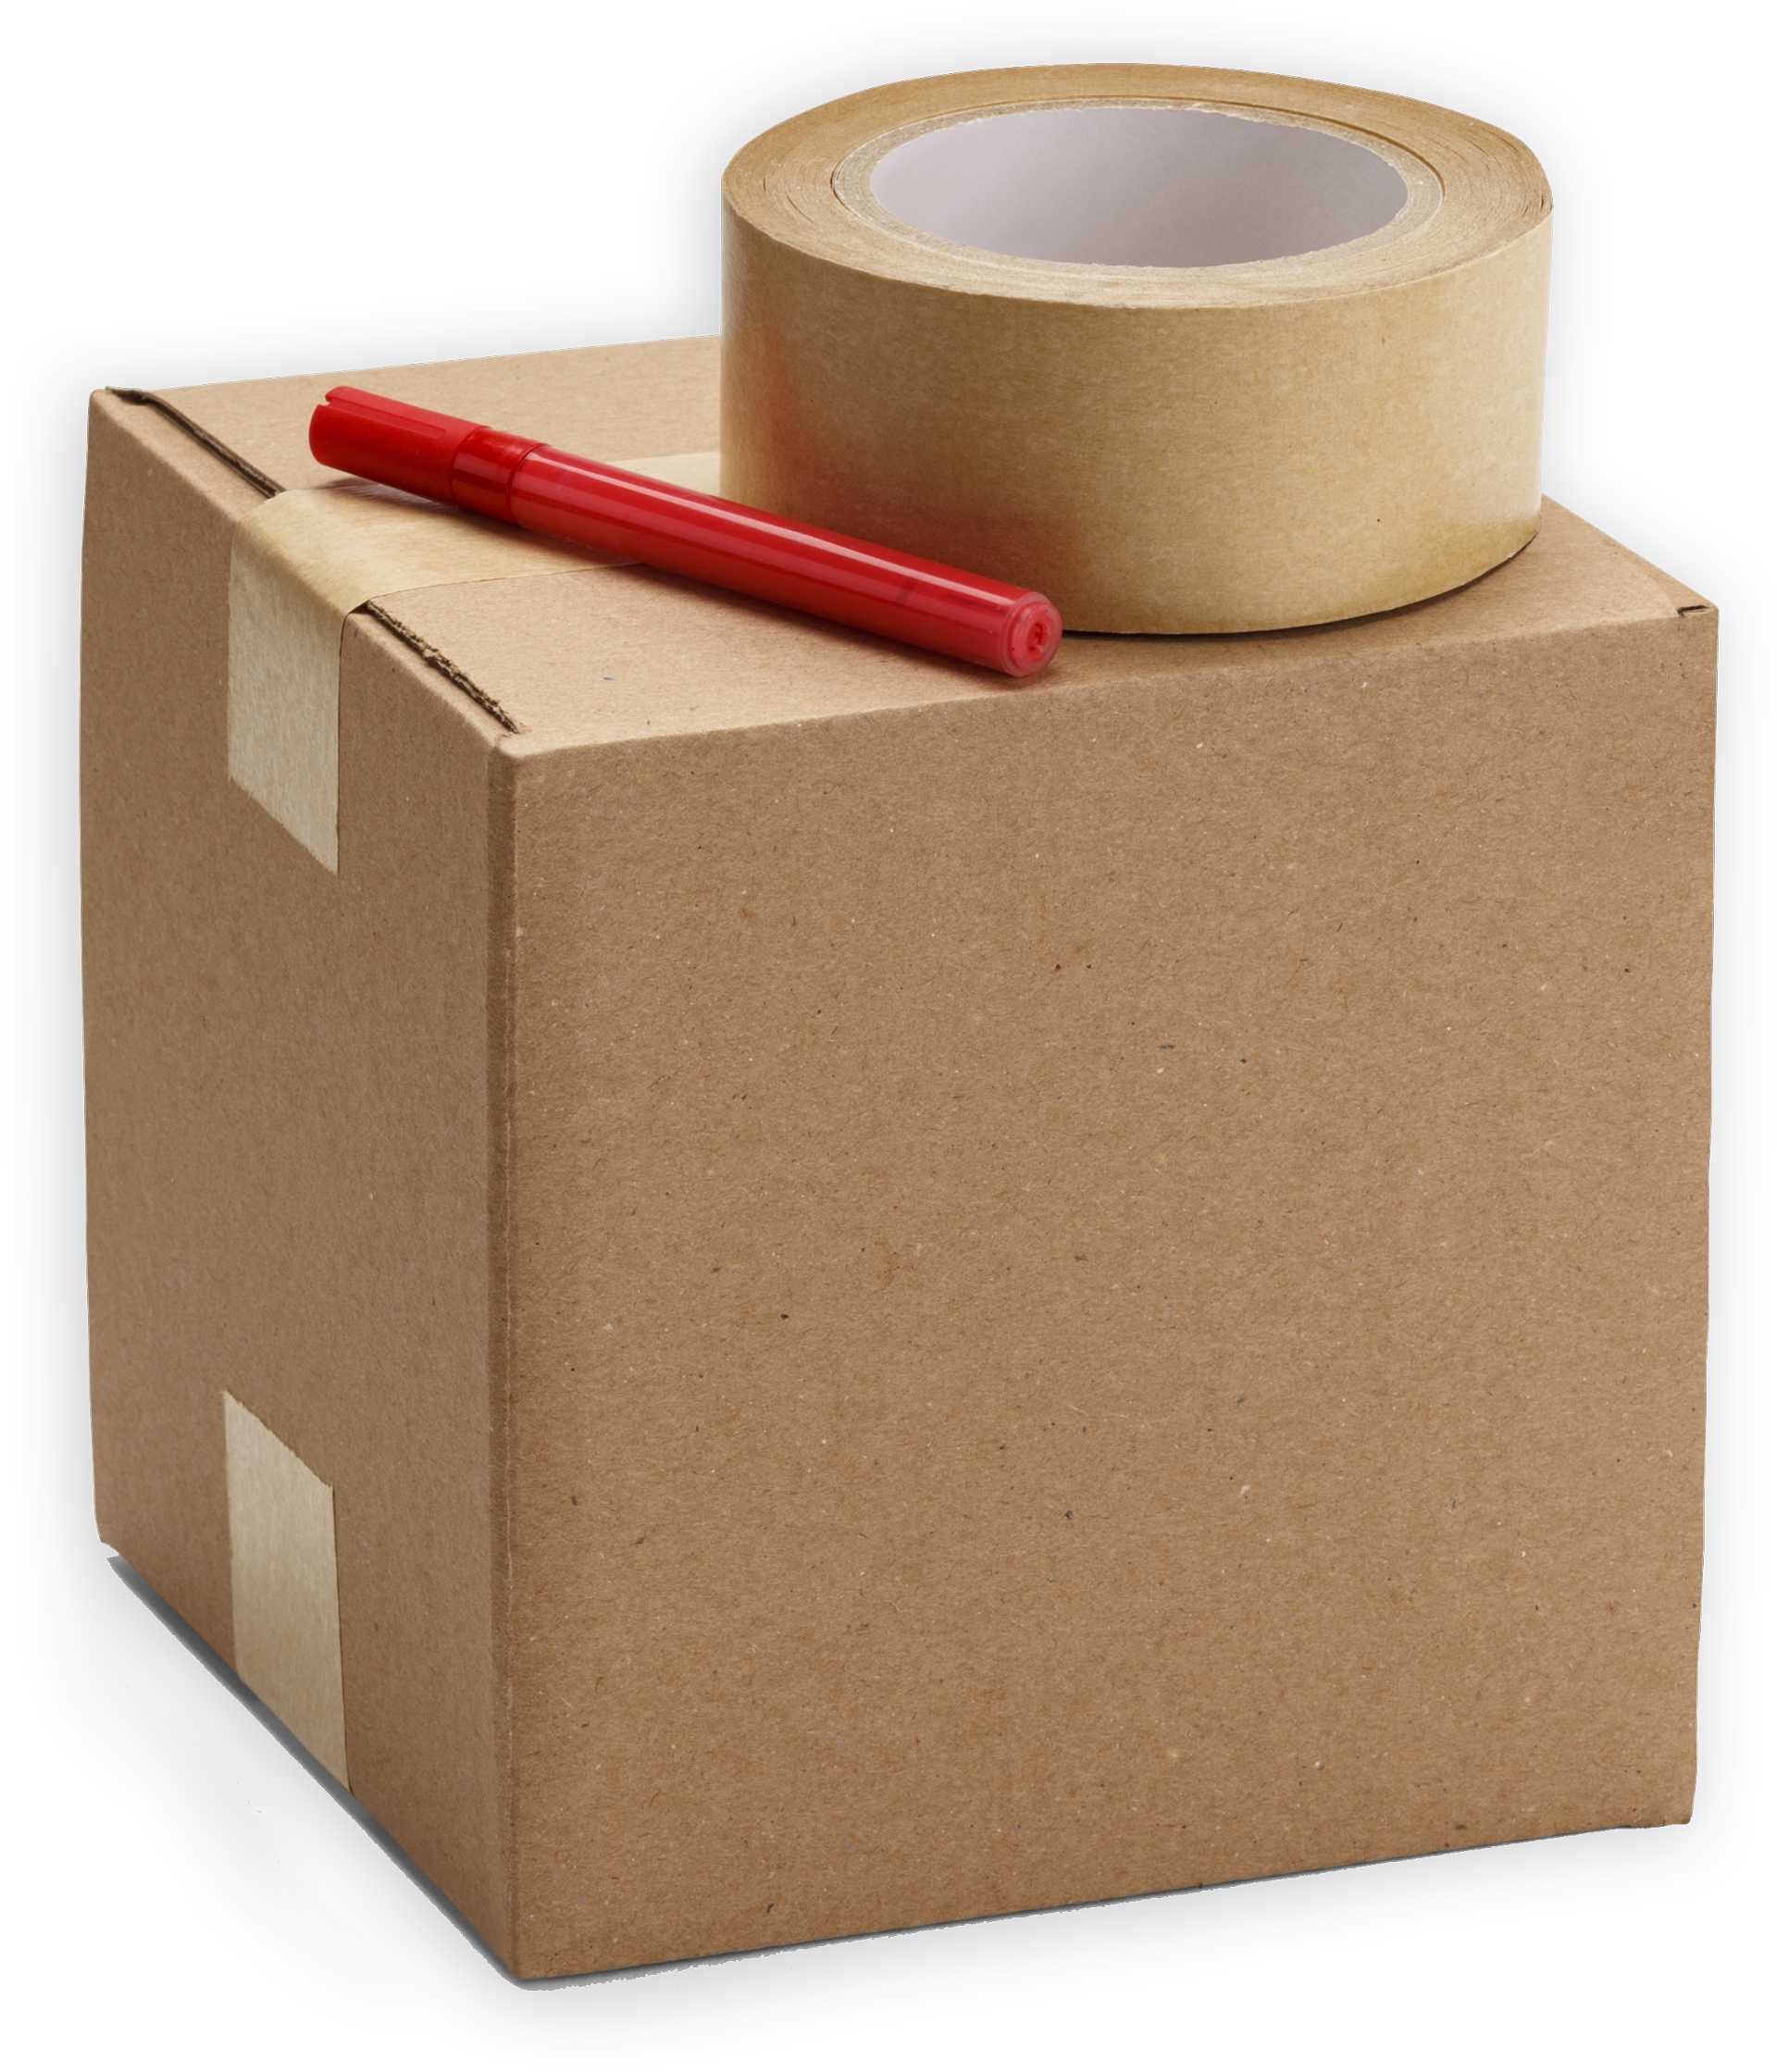 A Cardboard Box With a Roll of Tape and a Marker on Top